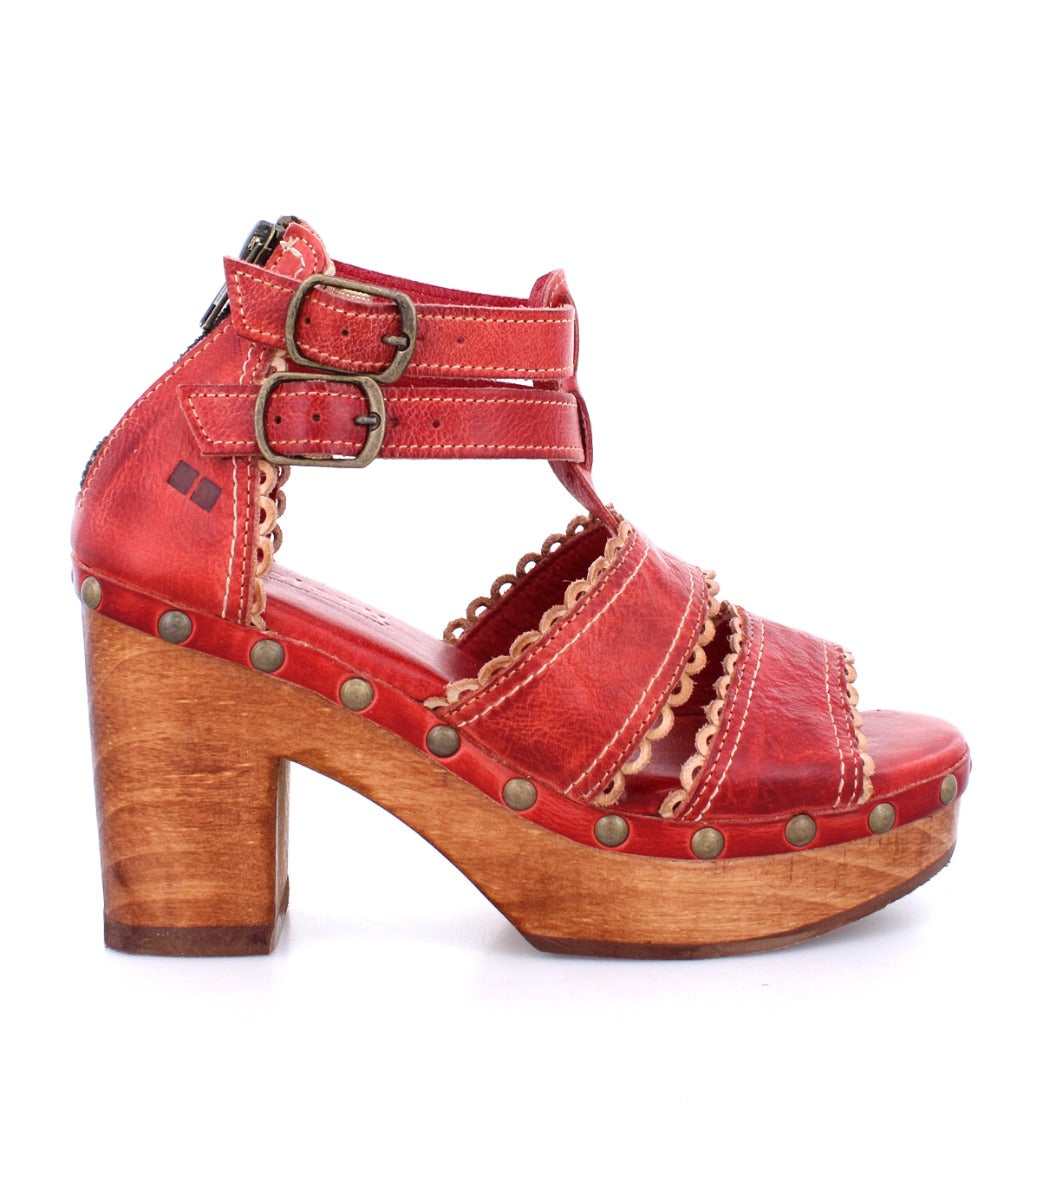 A women's red sandal with wooden platform and straps, called the Sloane by Bed Stu.